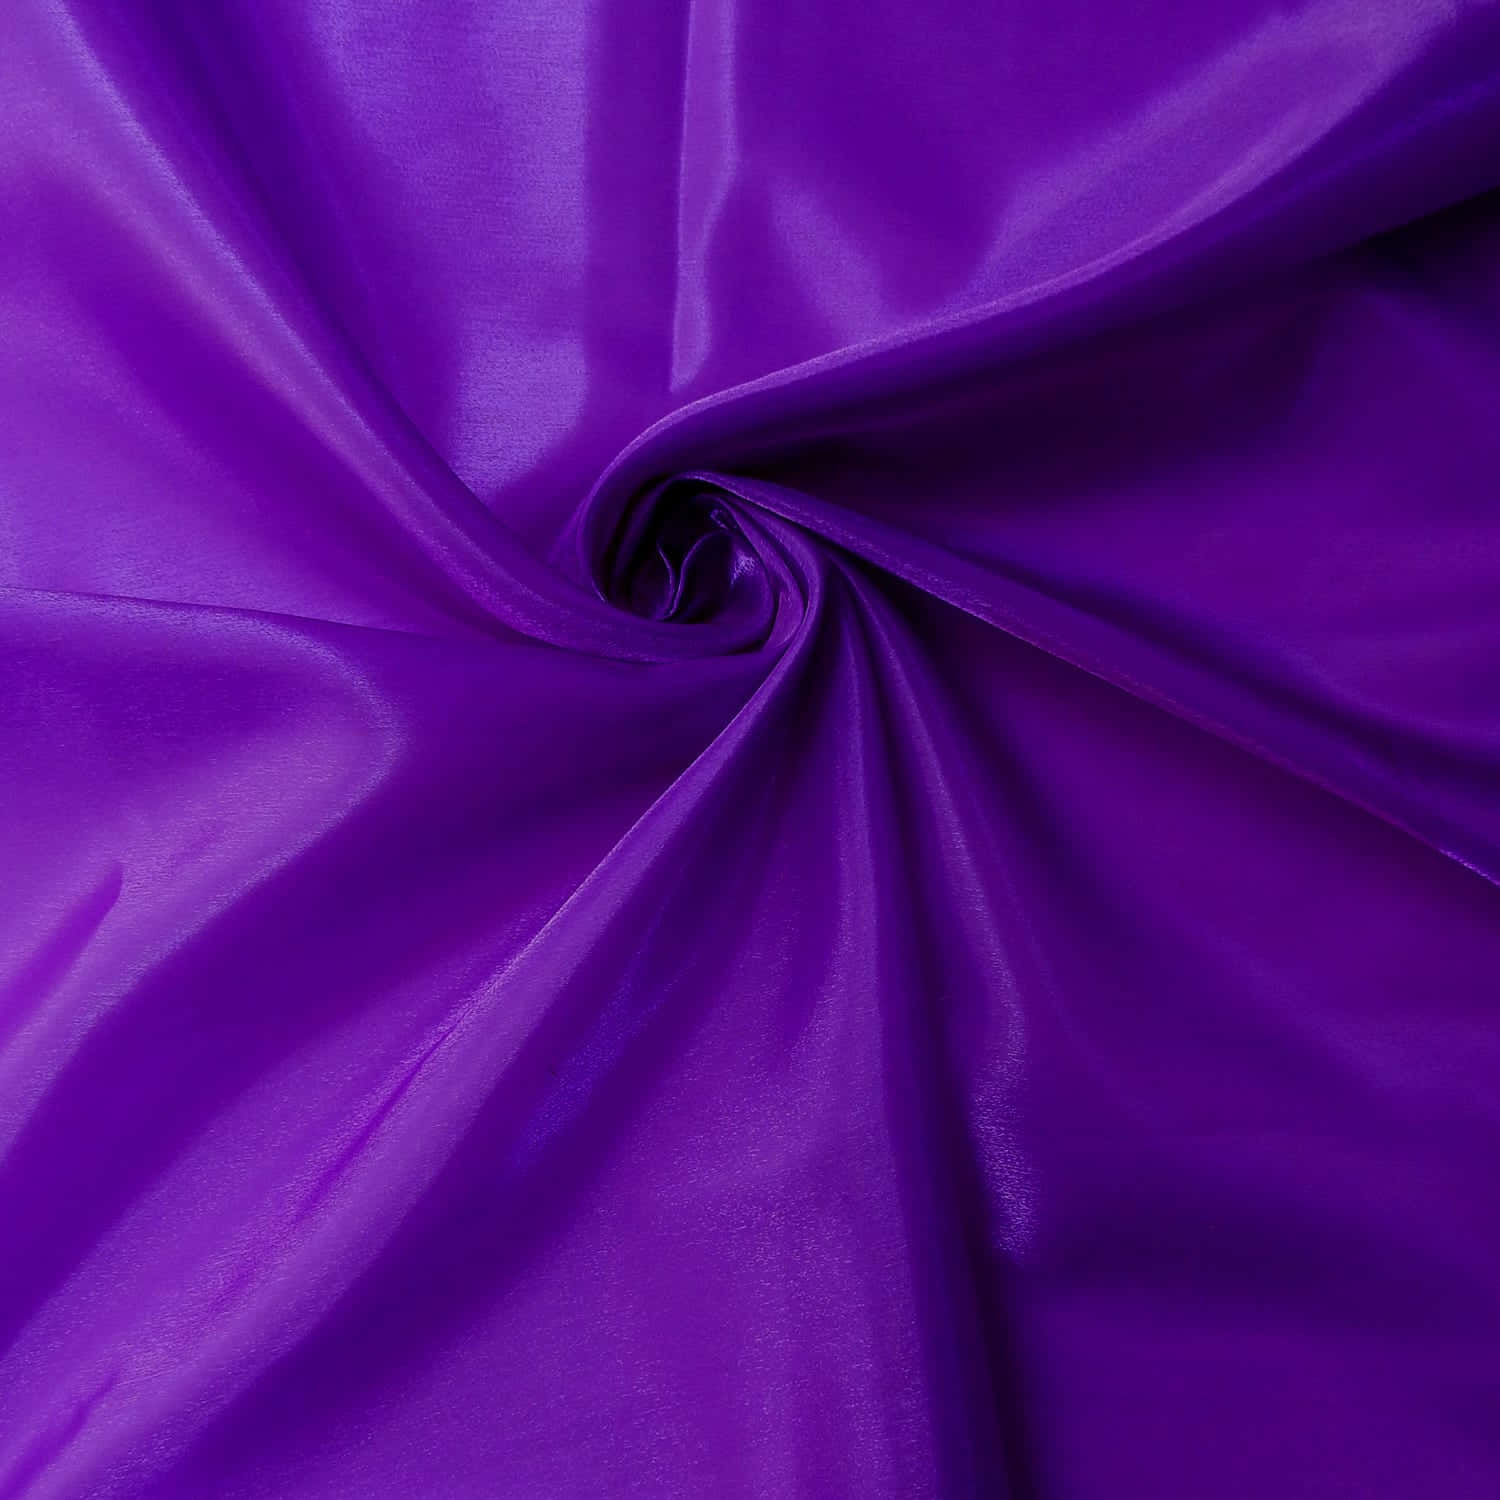 An exquisite purple satin fabric for your next project. Wallpaper